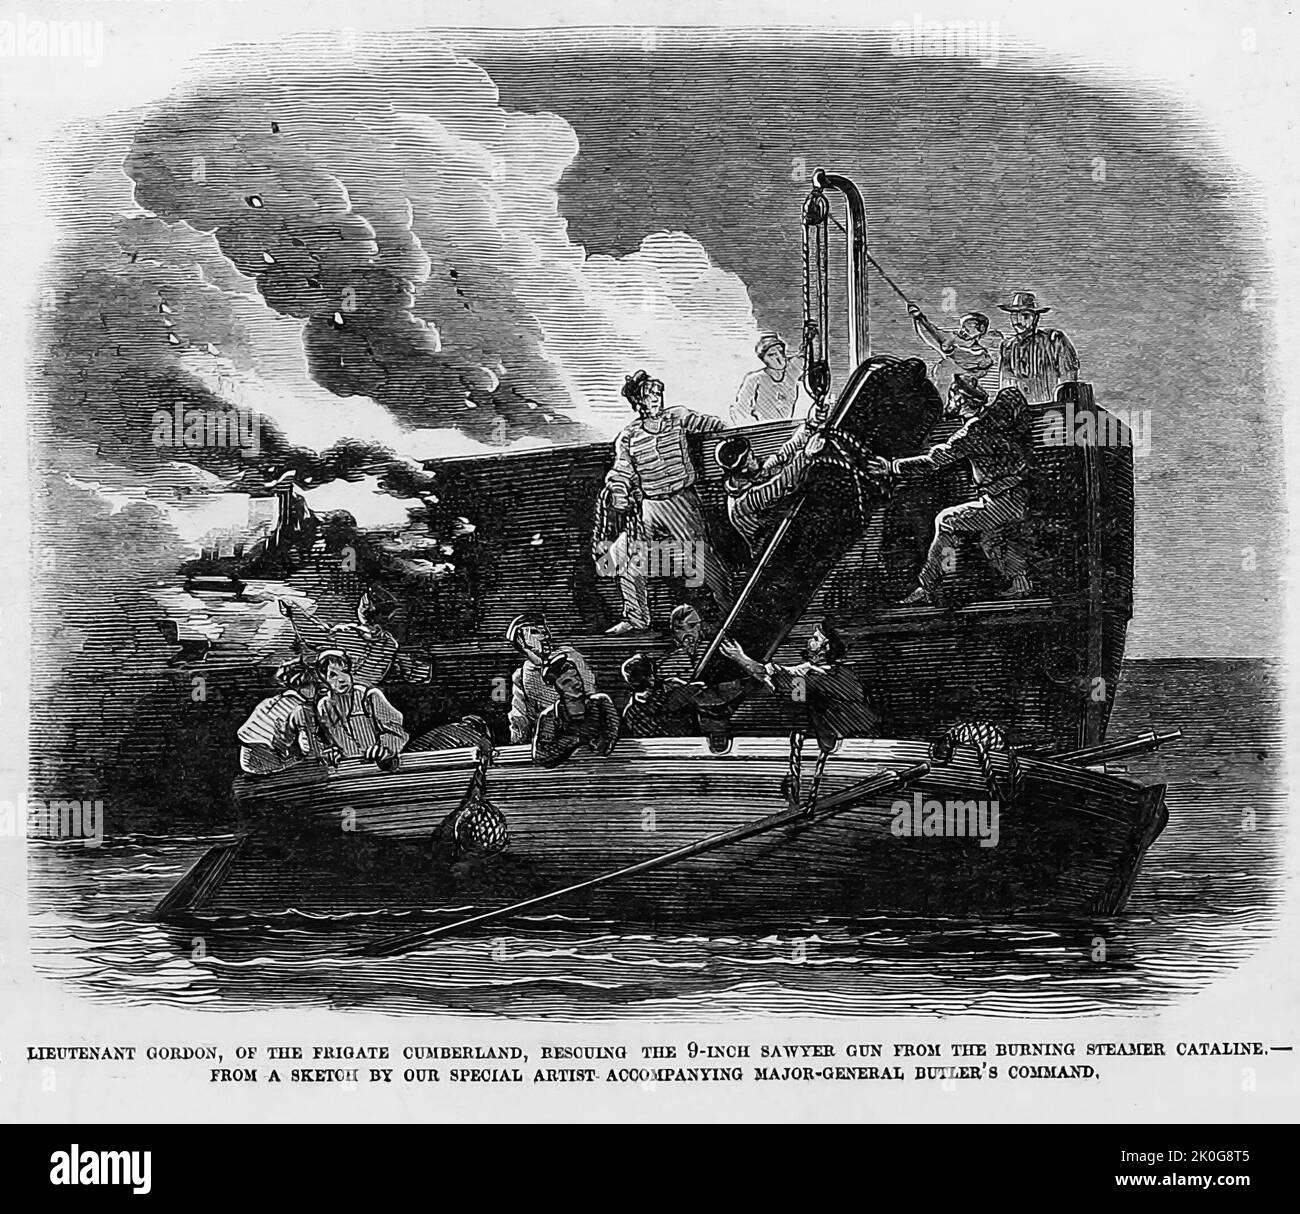 Lieutenant E. Gordon, of the frigate Cumberland, rescuing the 9-inch Sawyer Gun from the burning steamer Cataline, July 2nd, 1861. 19th century American Civil War illustration from Frank Leslie's Illustrated Newspaper Stock Photo